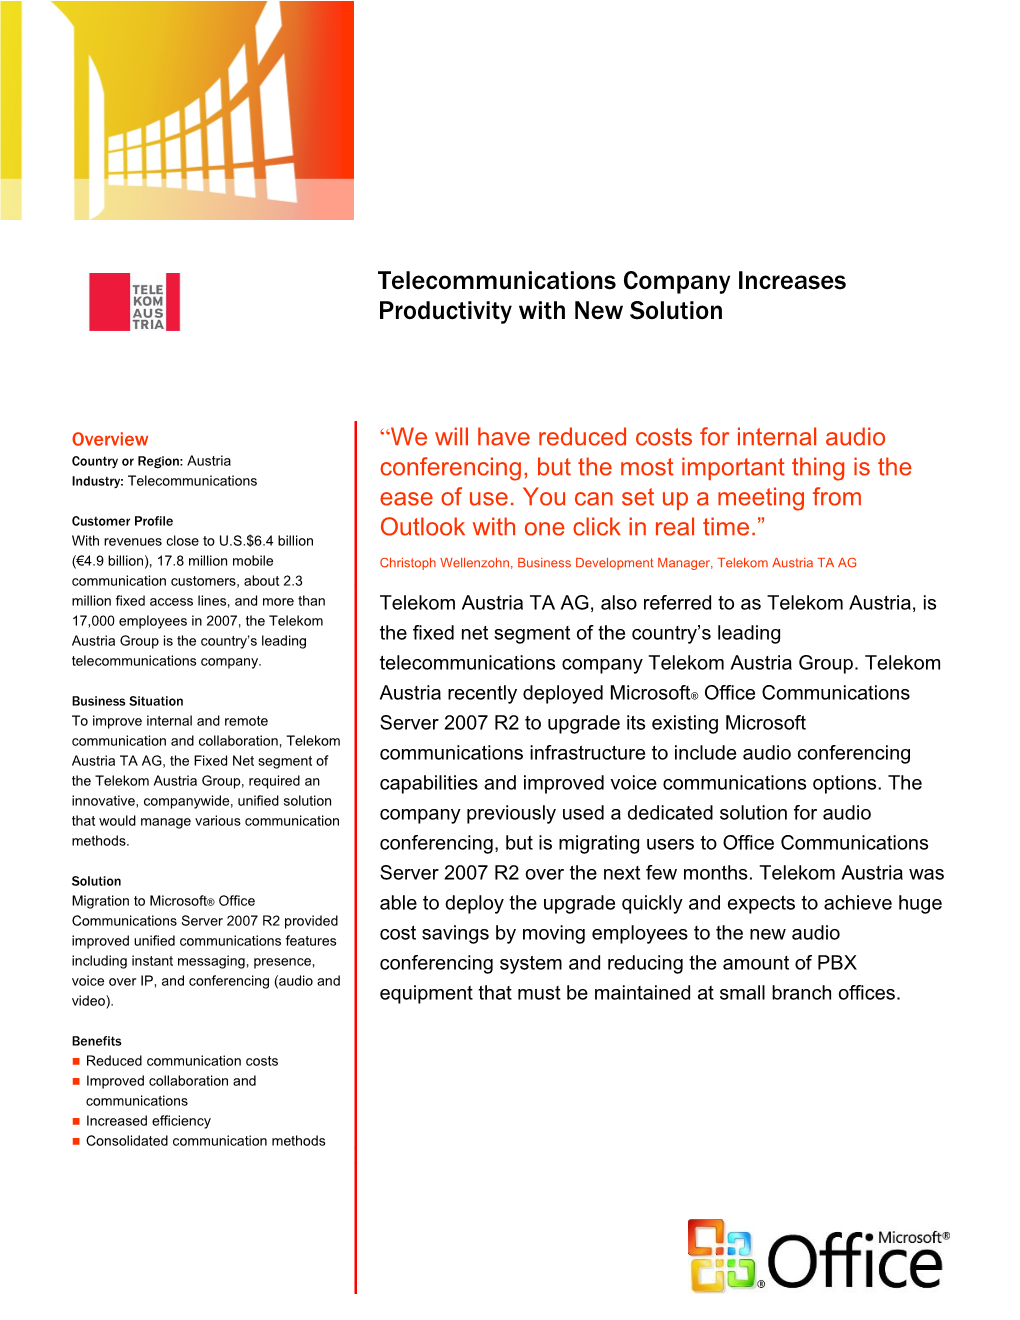 Telecommunications Company Increases Productivity with New Solution